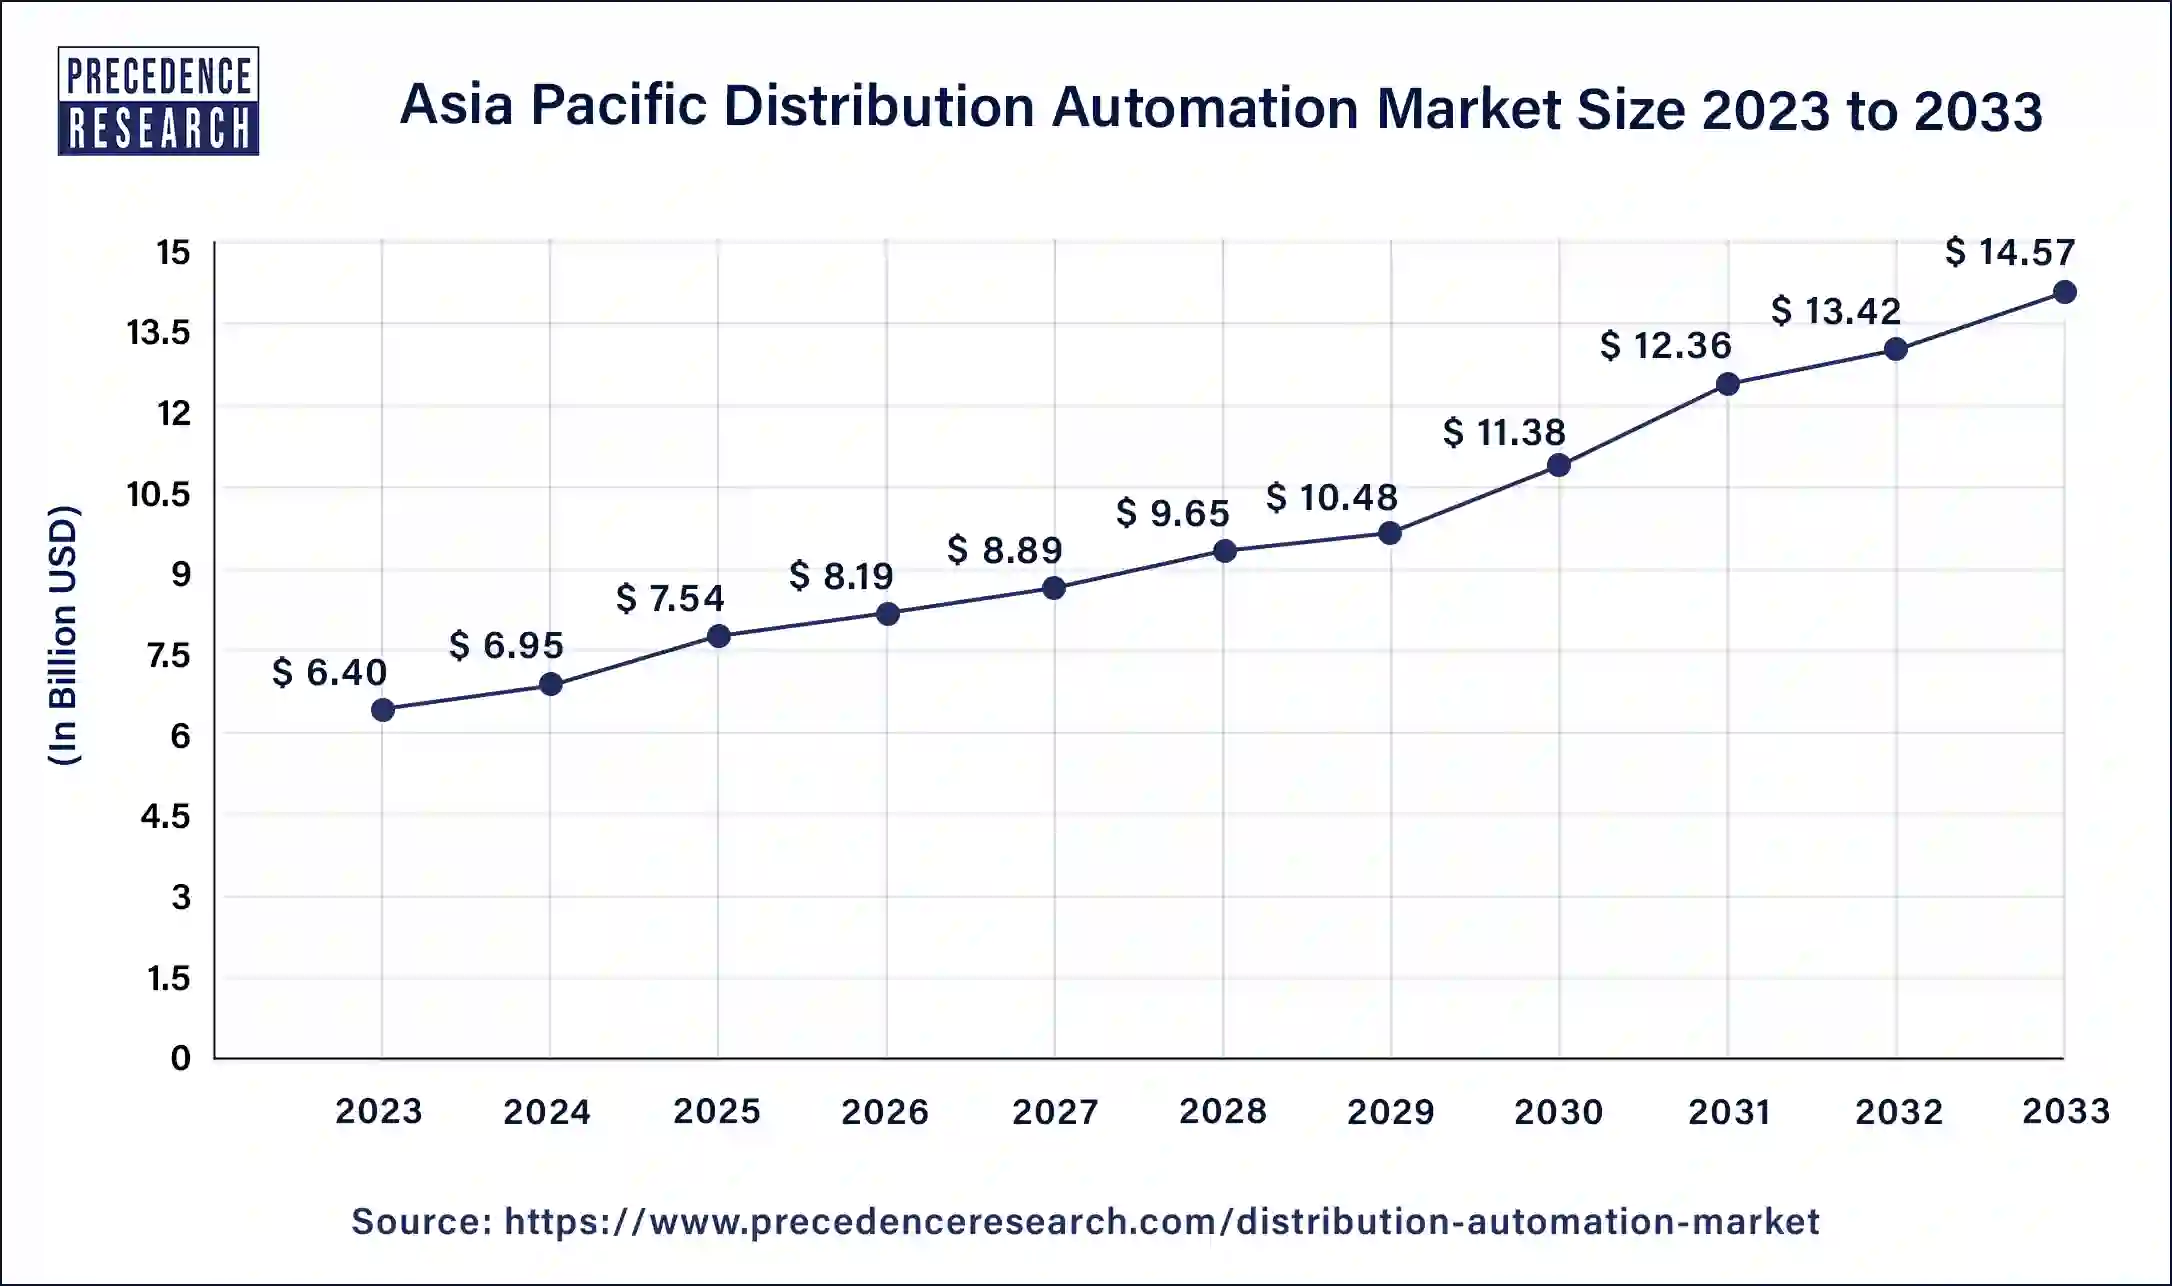 Asia Pacific Distribution Automation Market Size 2024 to 2033